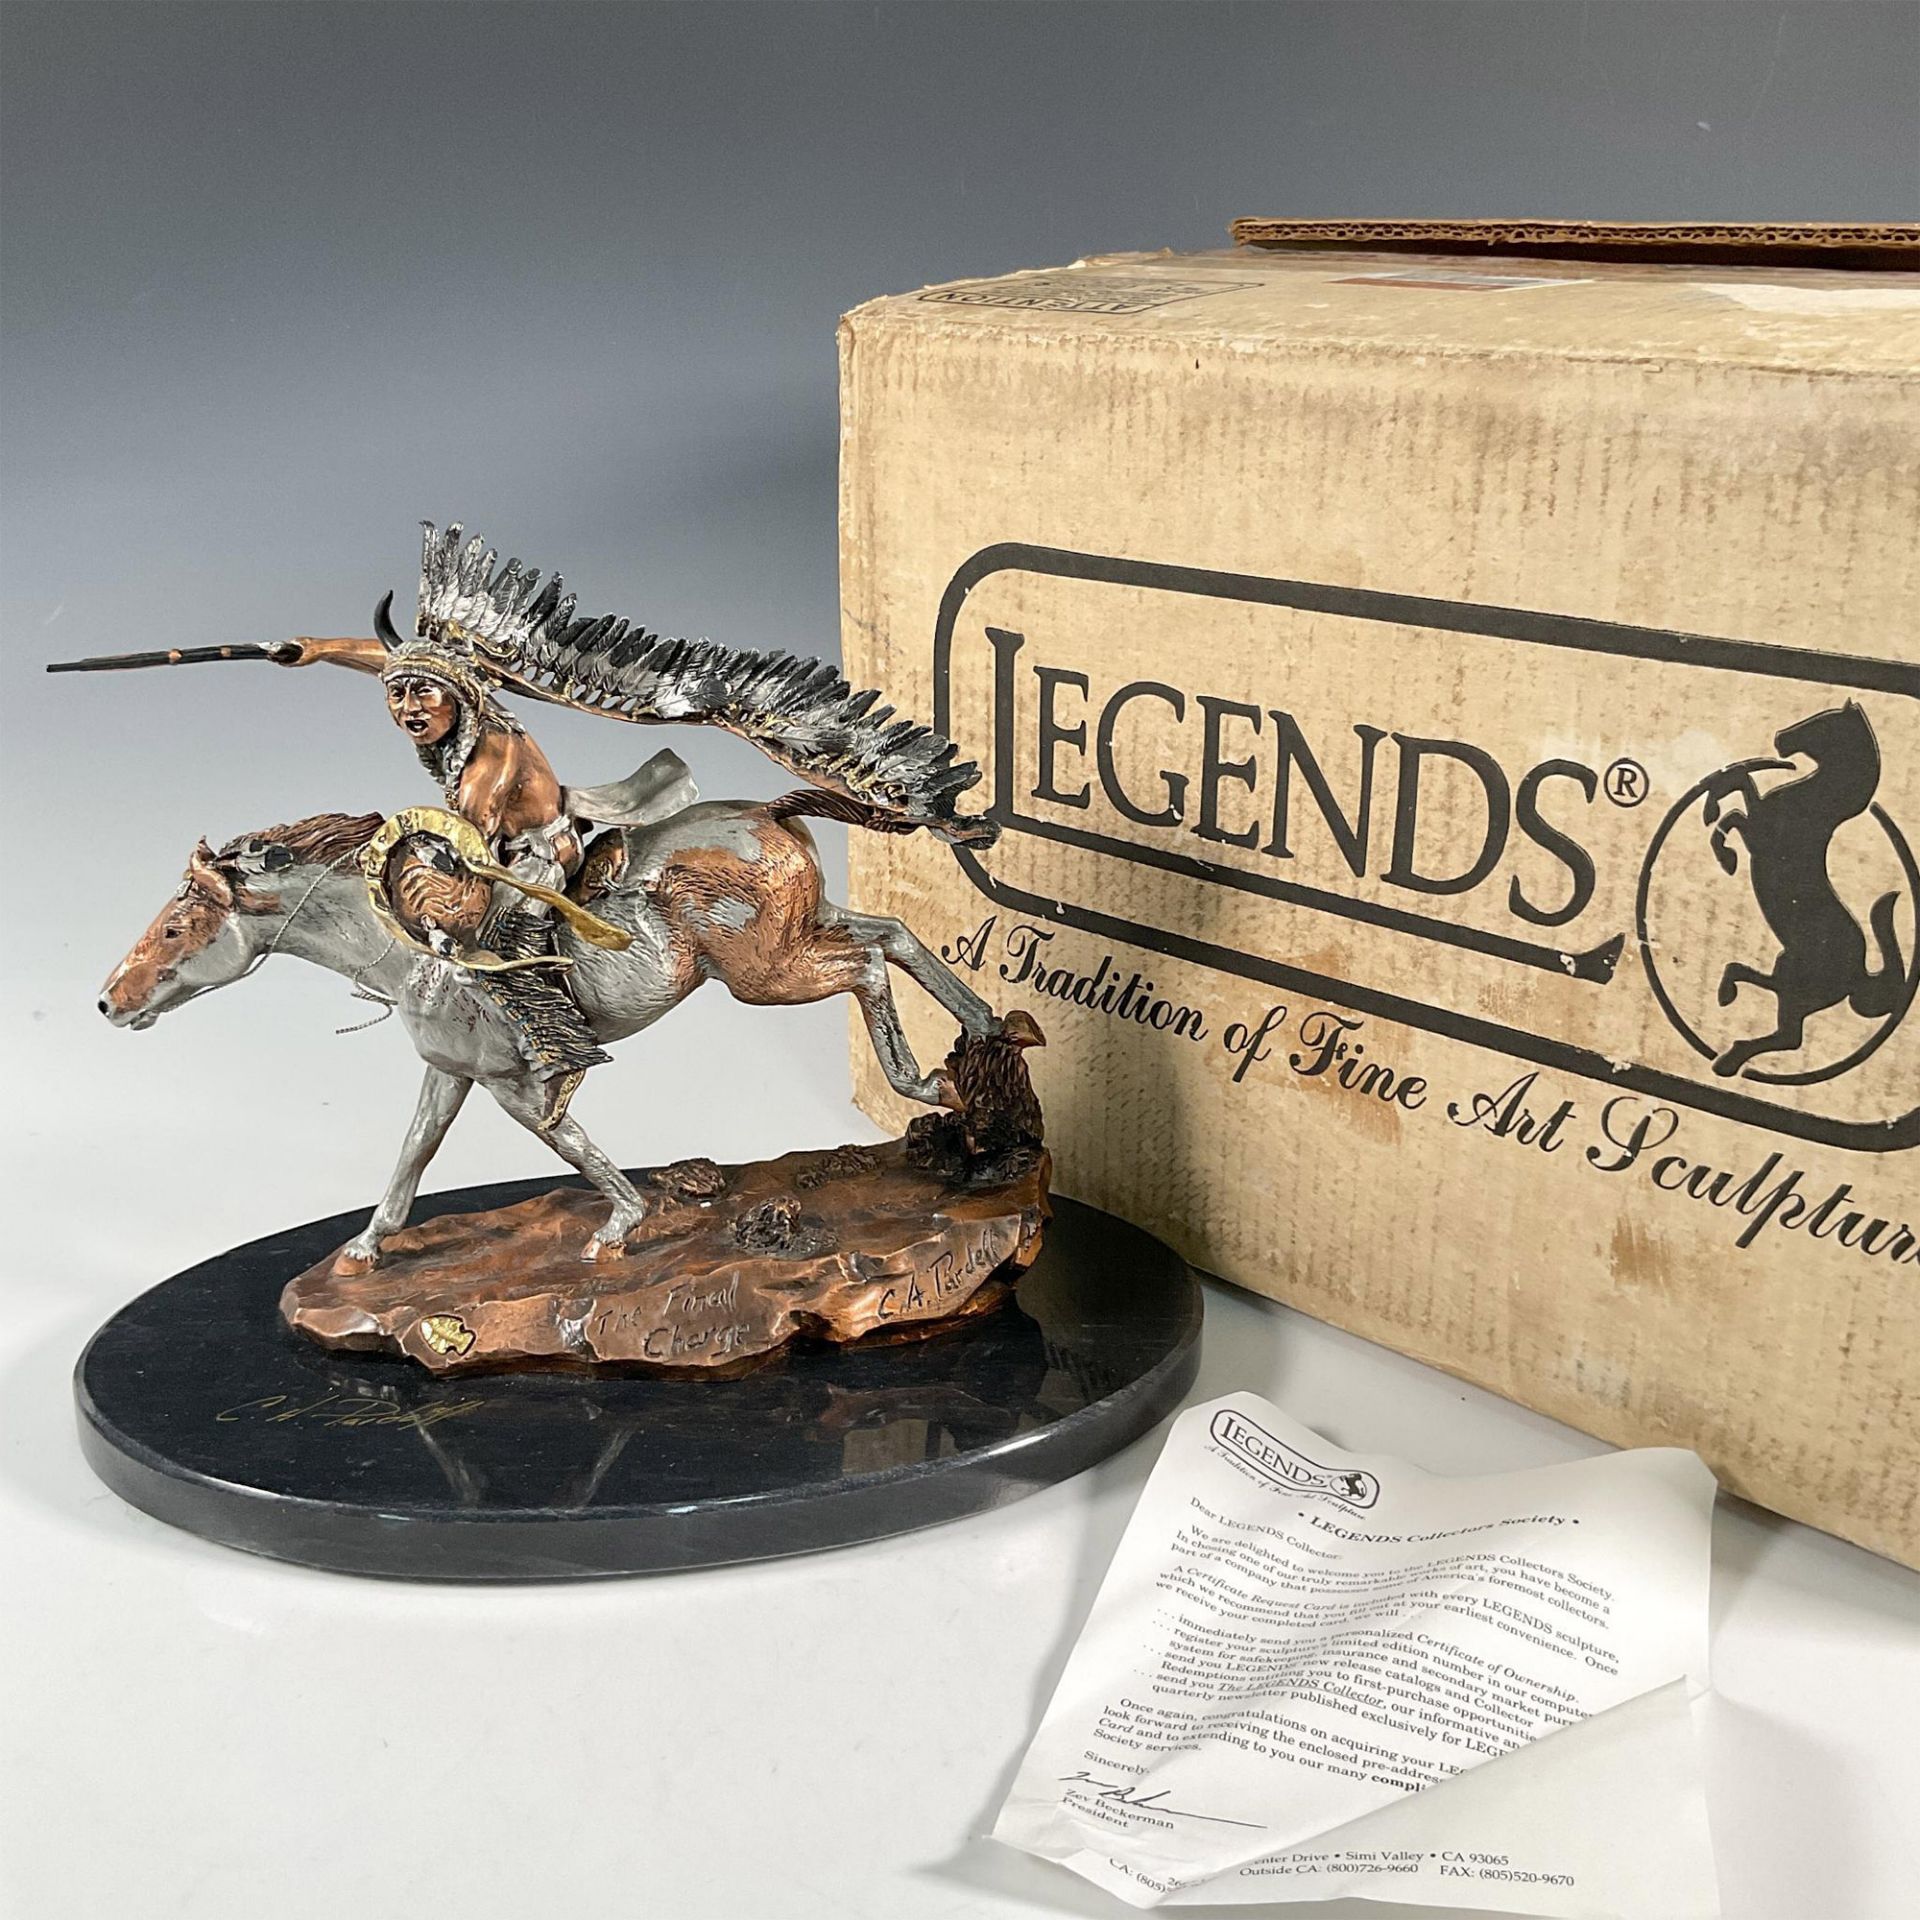 Legends Bronze Sculpture, The Final Charge - Image 4 of 4